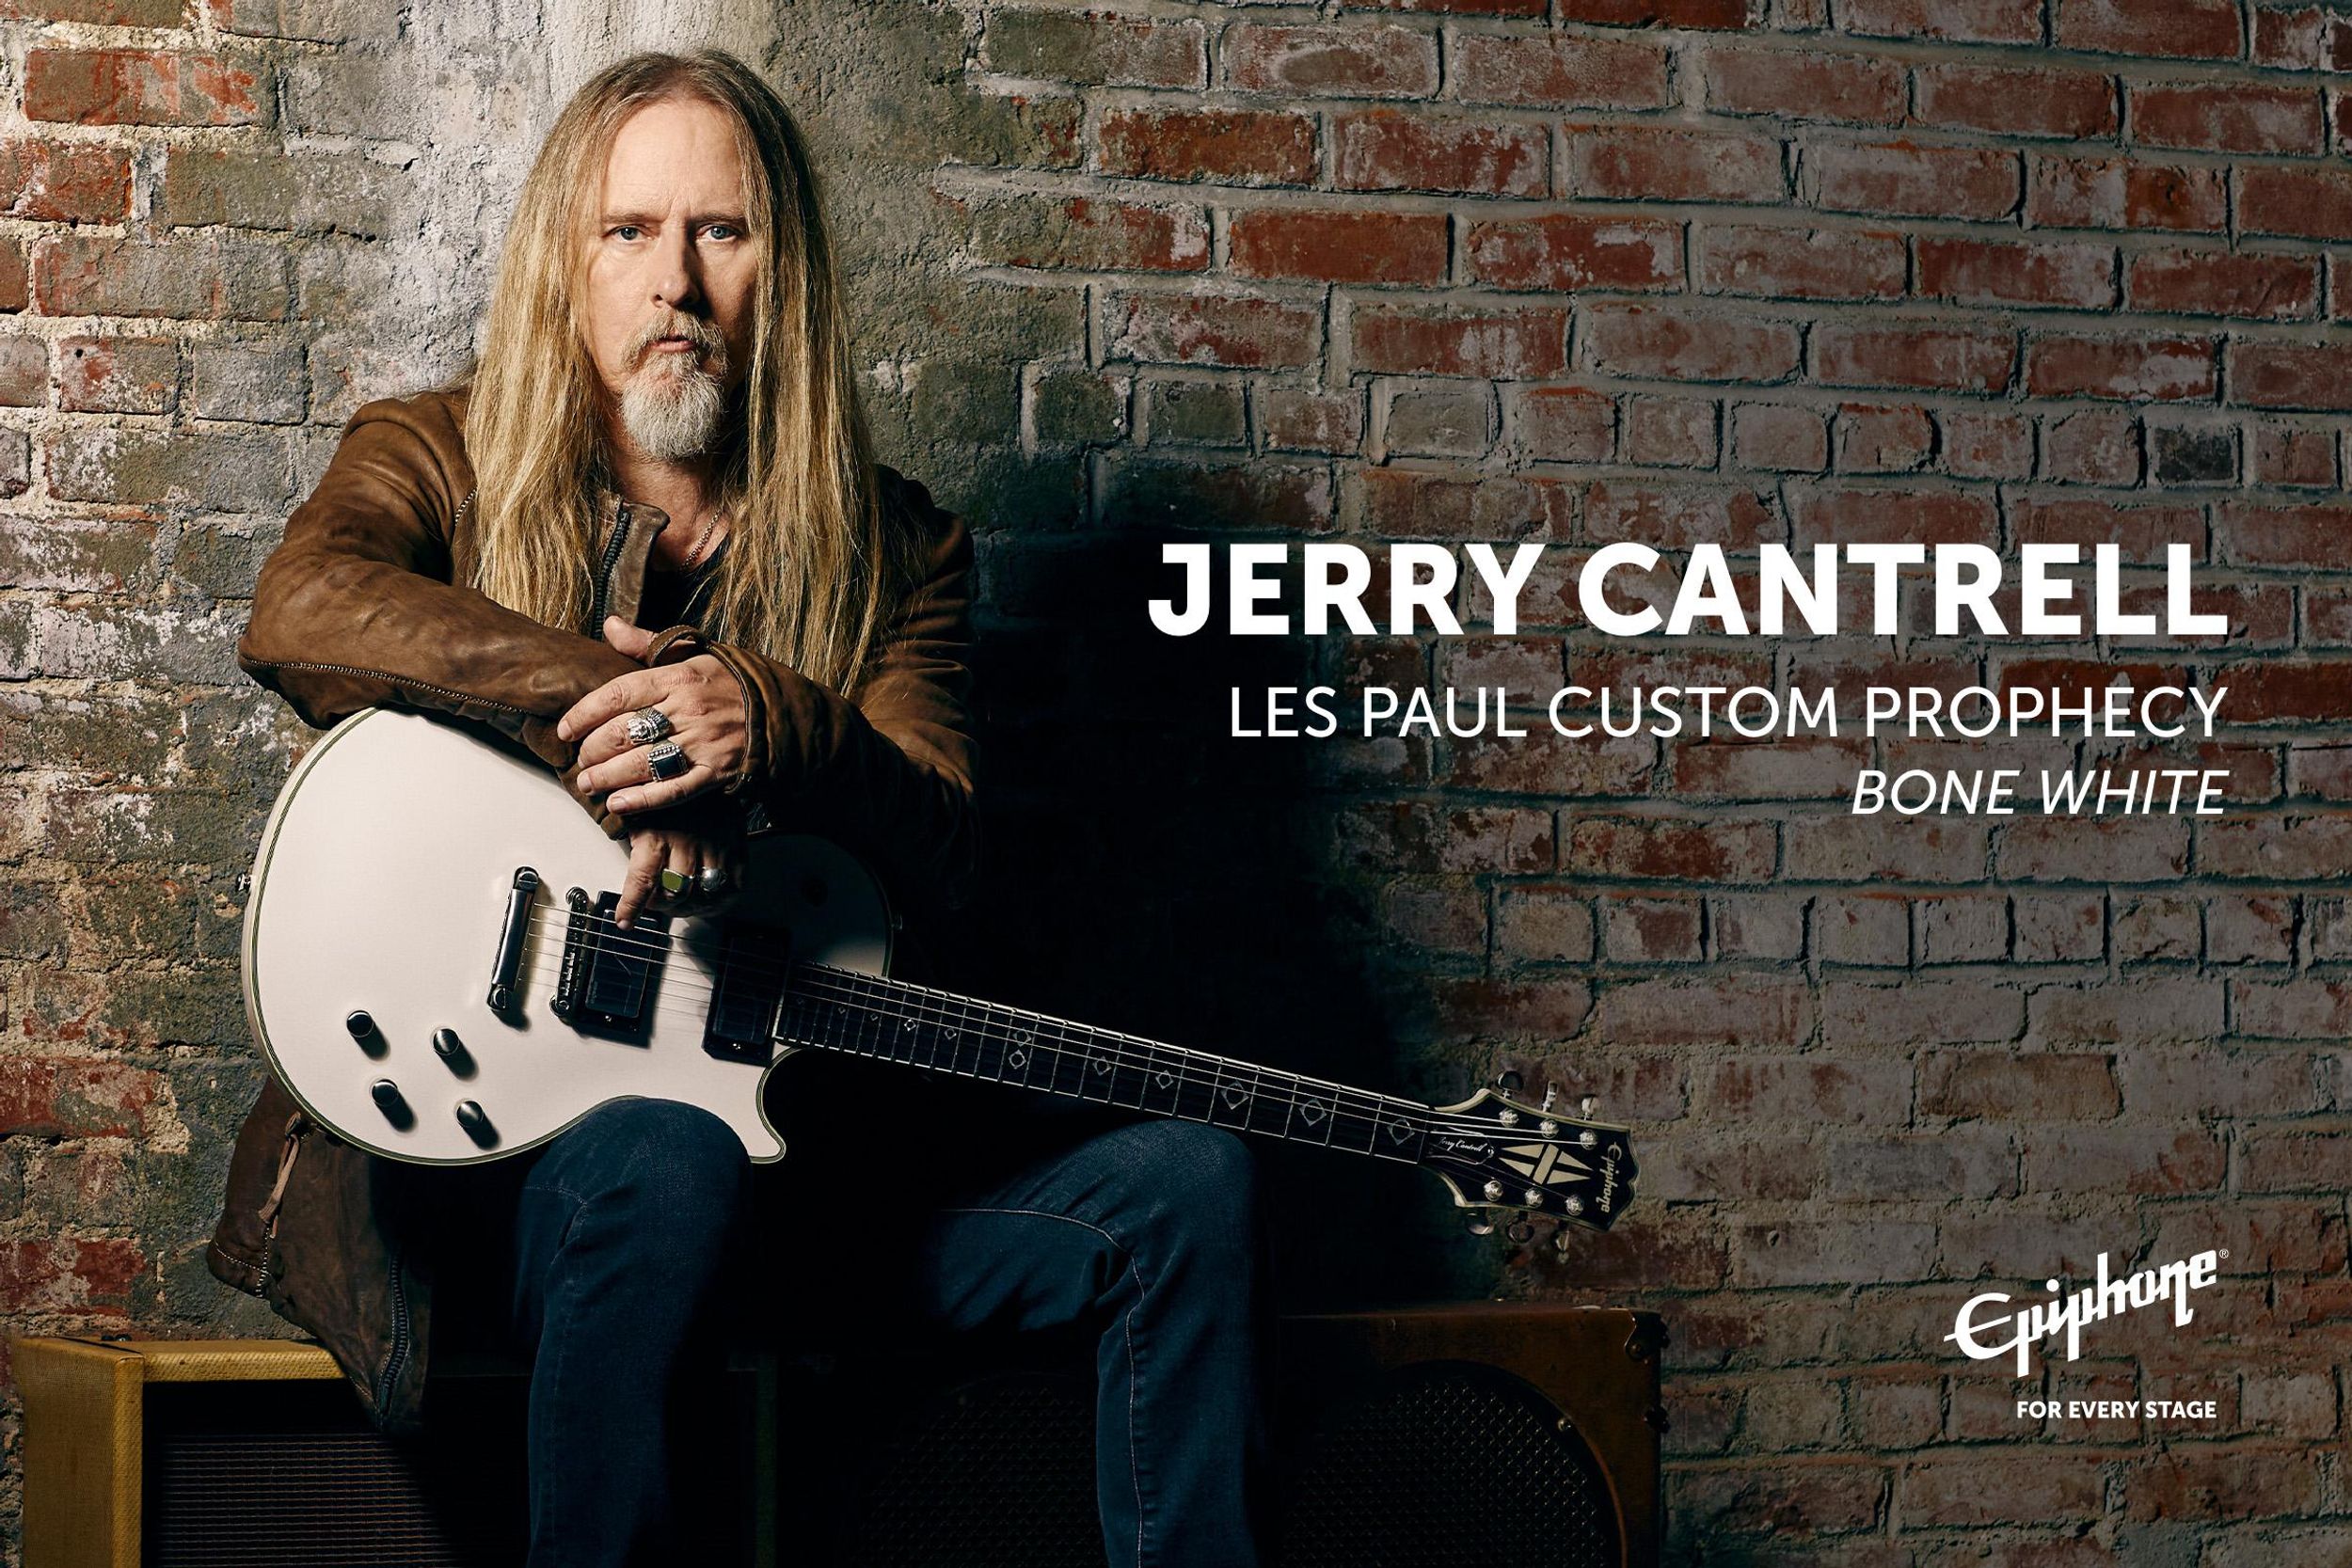 Jerry Cantrell & Epiphone Announce Two Special Edition Guitars